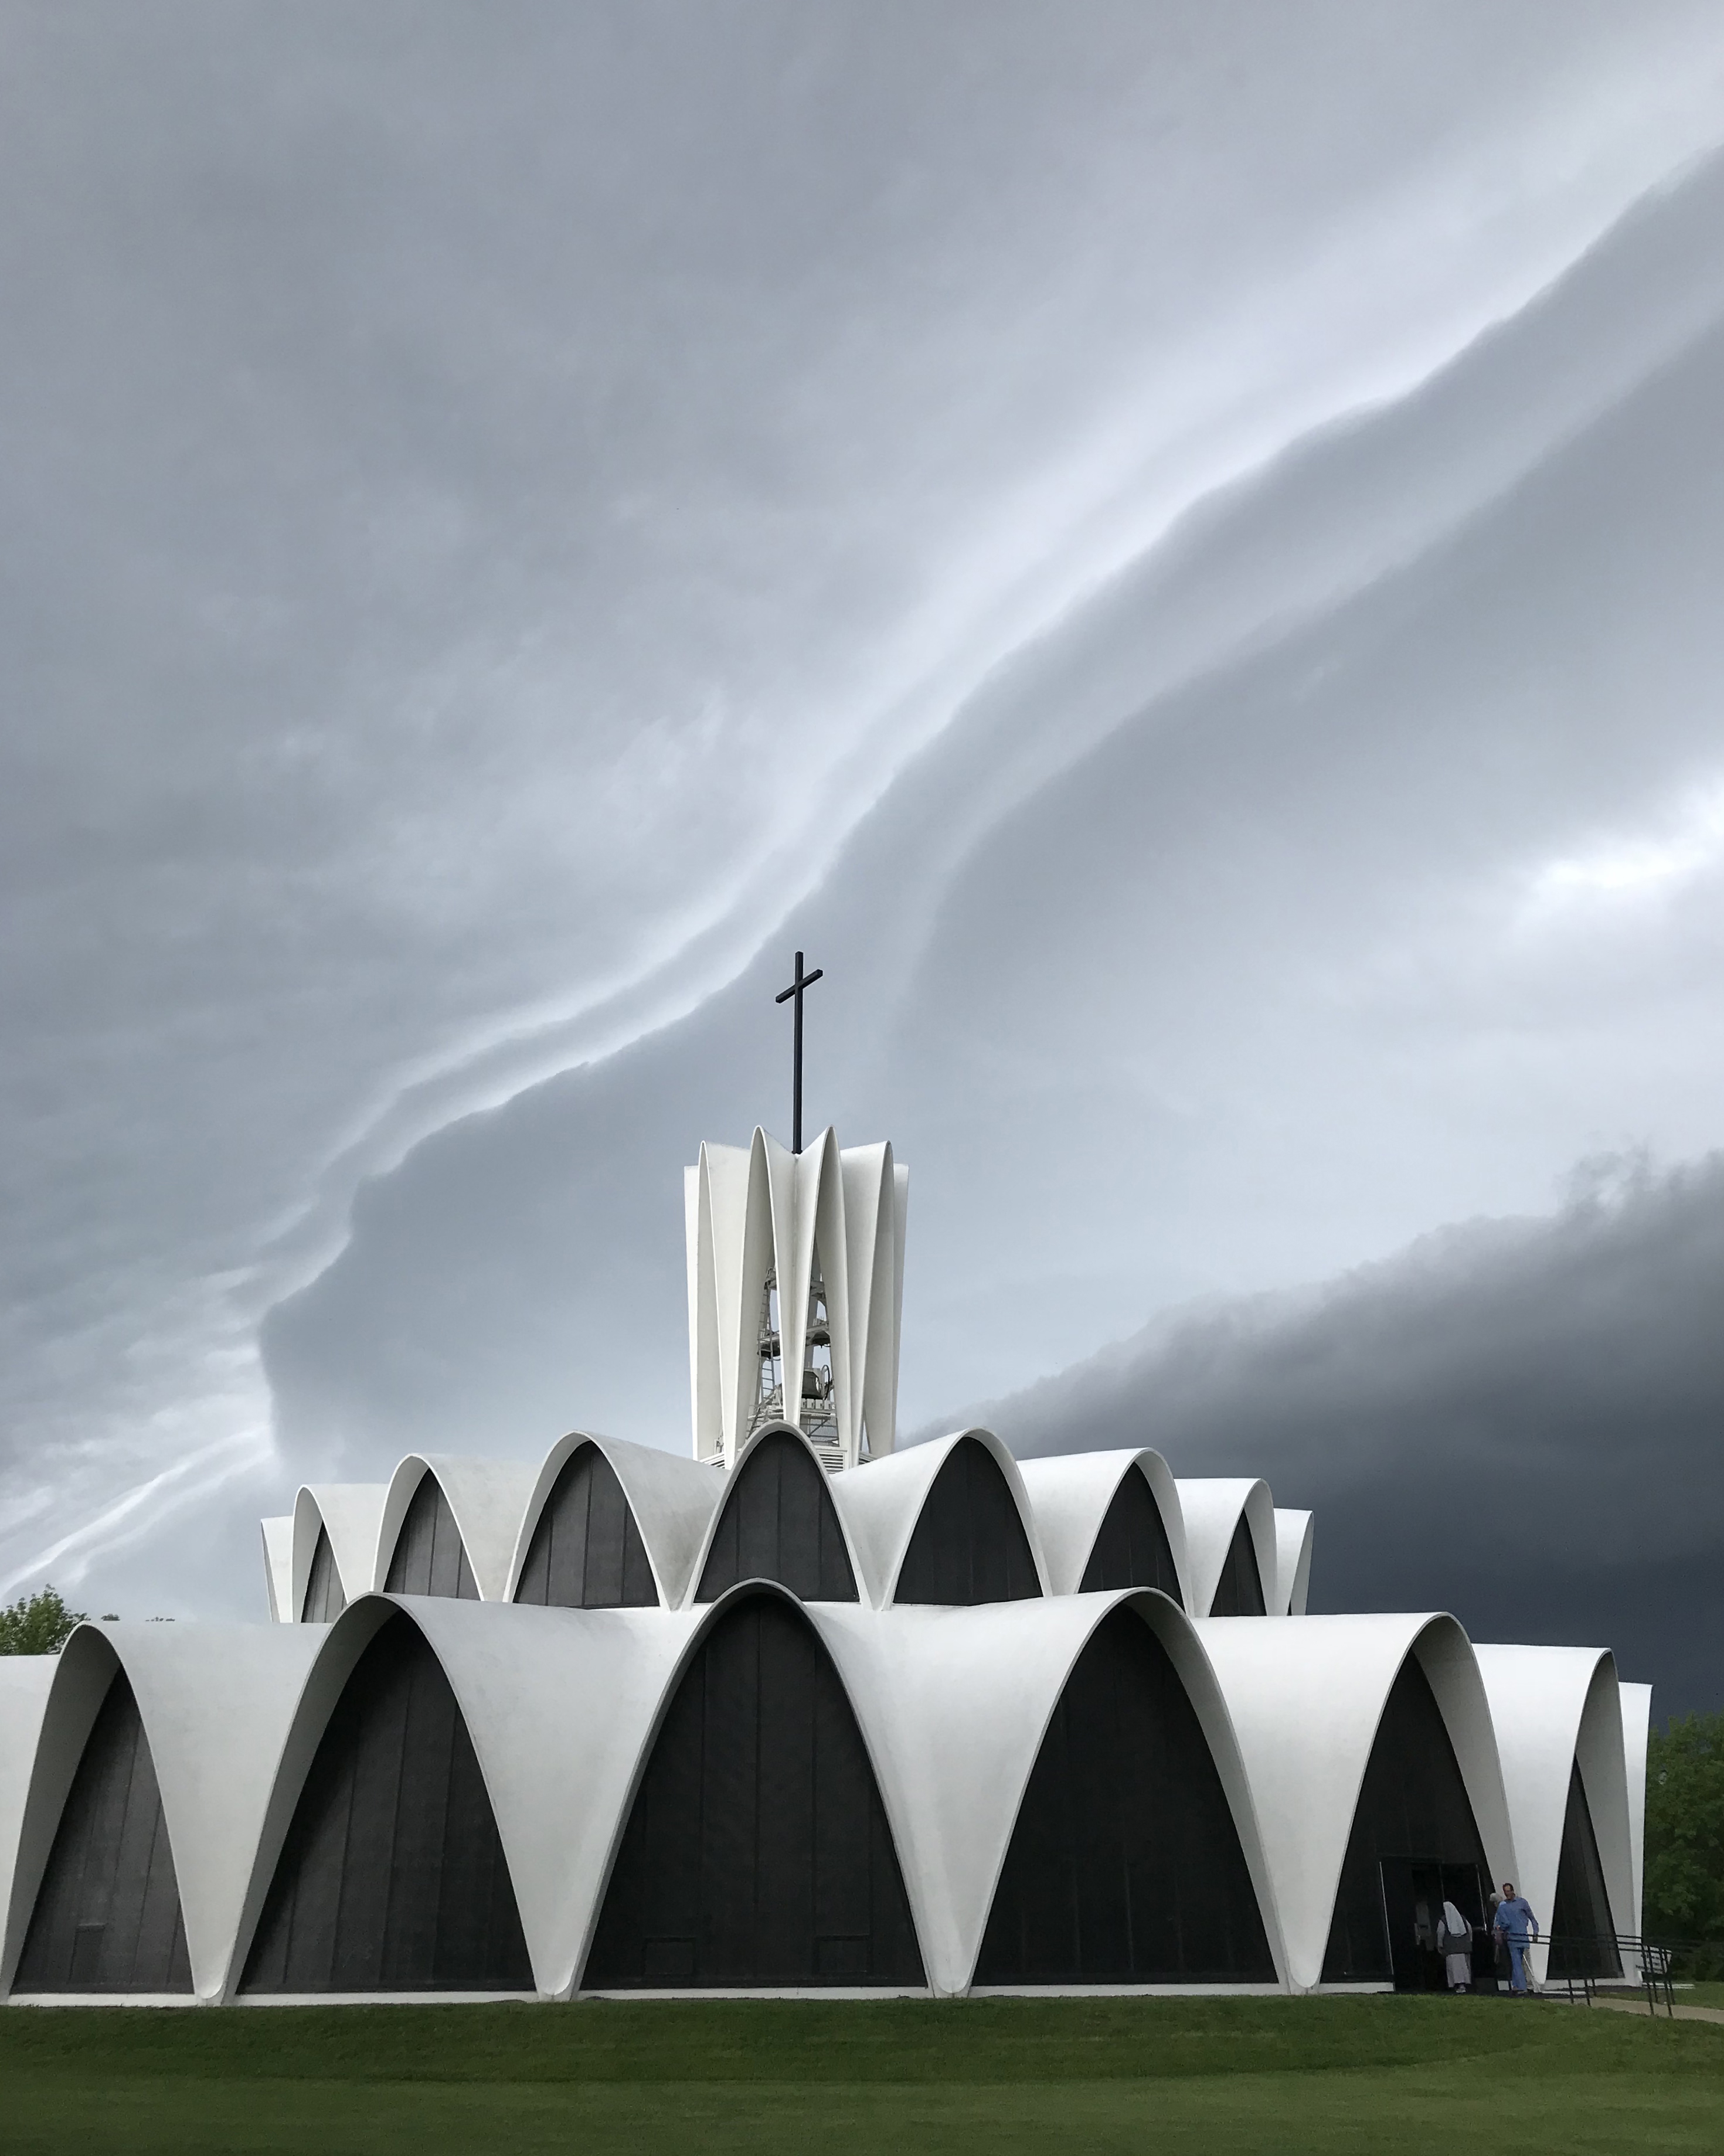 A shelf cloud approached from the west over the Church of Saint Mary and Saint Louis (Abbey Church) in Creve Coeur on May 22. The church’s circular facade consists of three tiers of whitewashed, thin-poured concrete parabolic arches, with the top one forming a bell tower. The church was designed by Gyo Obata of Hellmuth, Obata and Kassabaum (HOK) with consultation by Italian architect and engineer Pier Luigi Nerv. Construction was completed in 1962, and the church was dedicated and blessed that year.